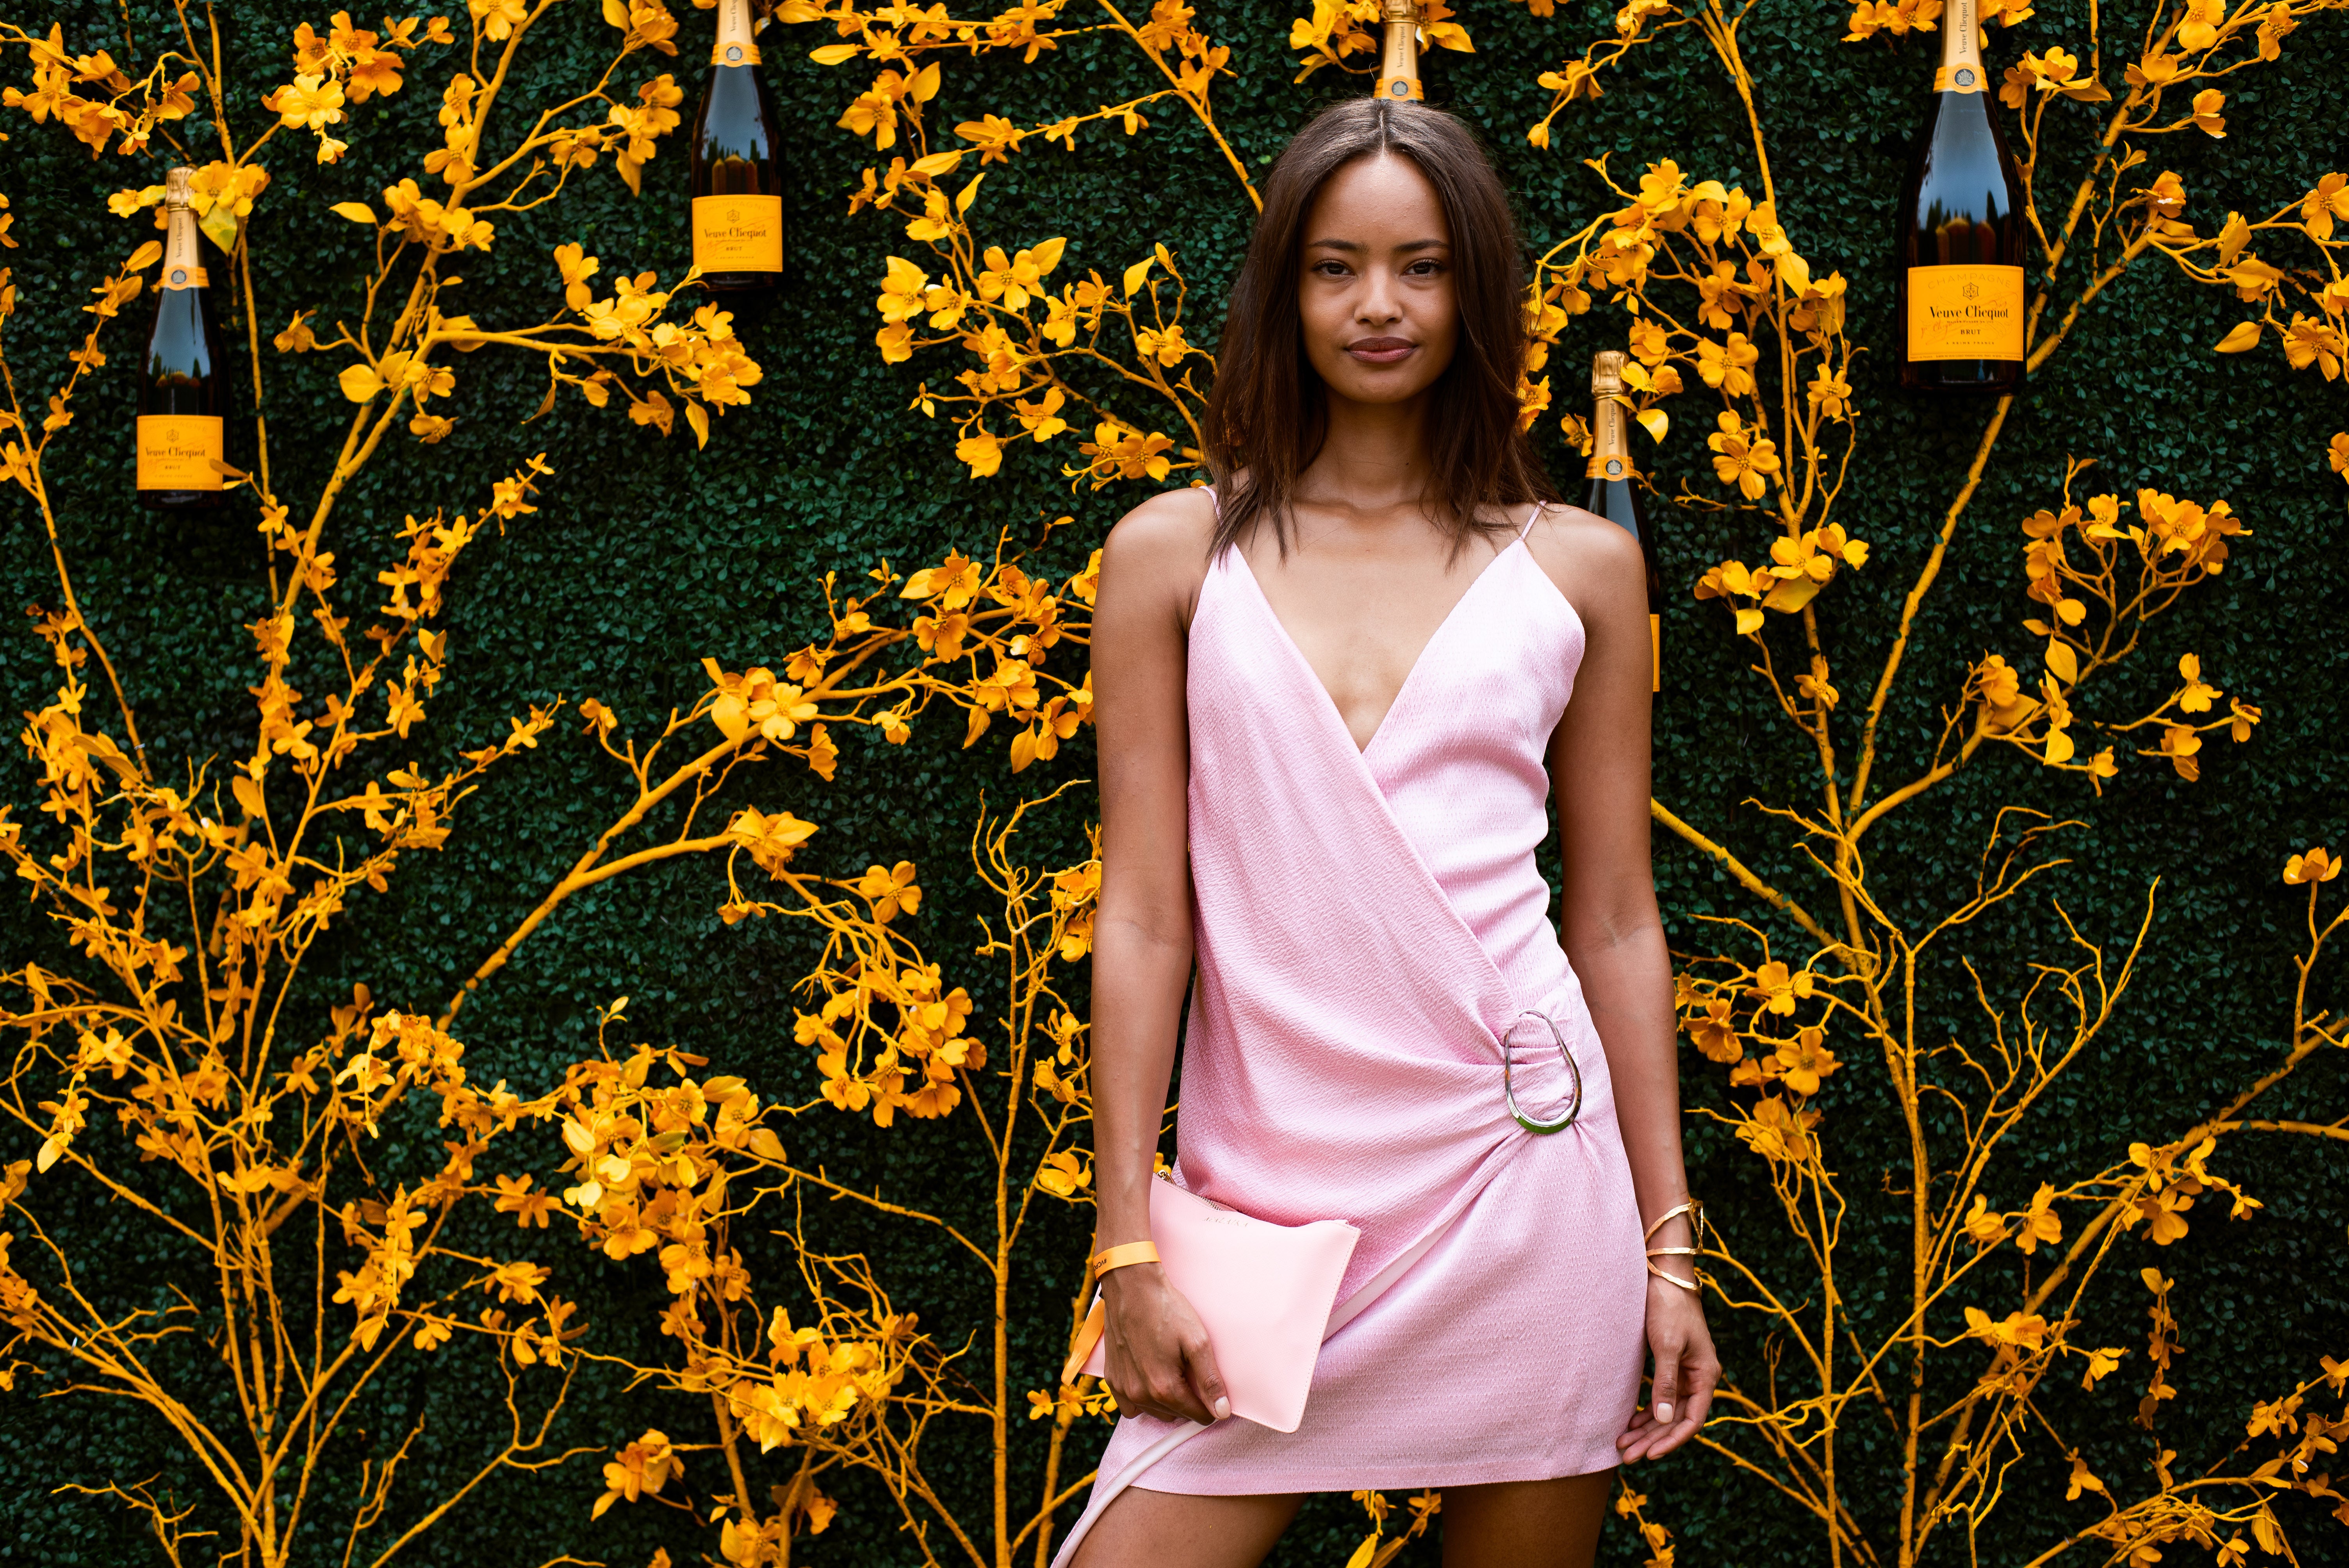 28 Times Black Excellence Showed Out at The 12th Annual Veuve Clicquot Polo Classic